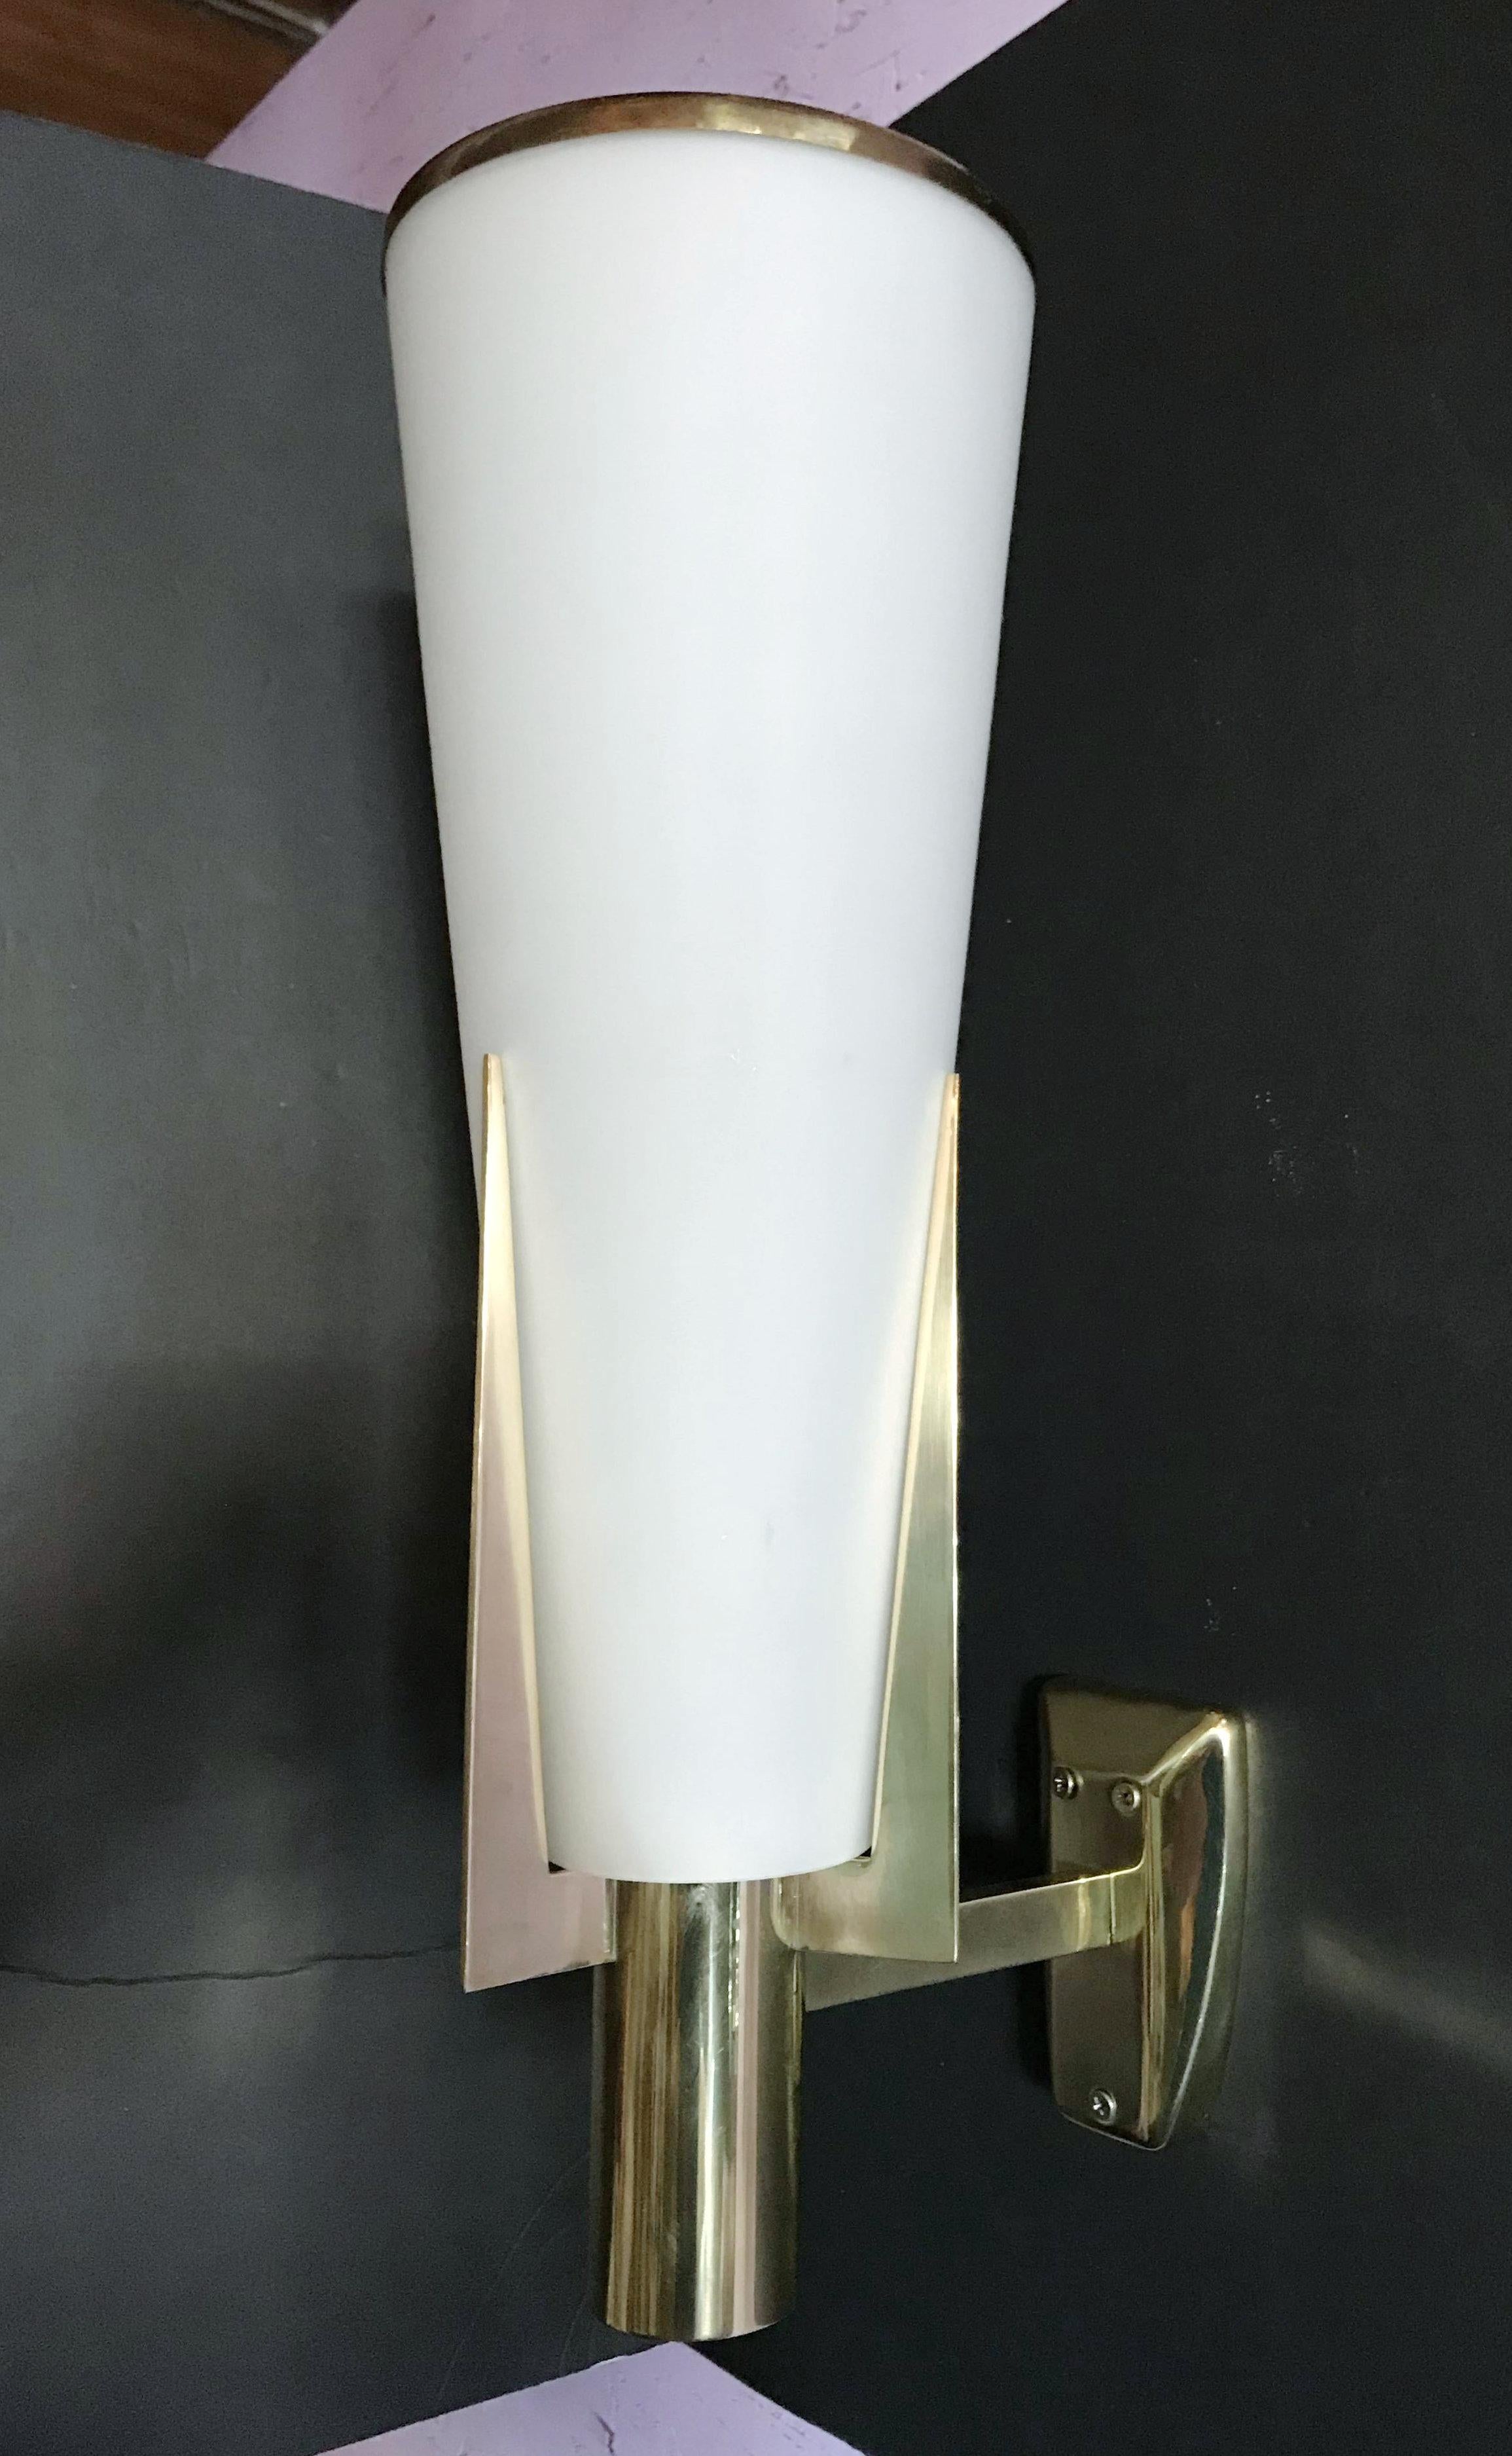 Rare original Stilnovo wall lights model 2021/1, frosted tapered conical glass shades held by polished brass structure, some have original stickers / Made in Milan Italy in 1960s
Measures: Height 20 inches / width 6 inches / depth 8 inches
1 light /